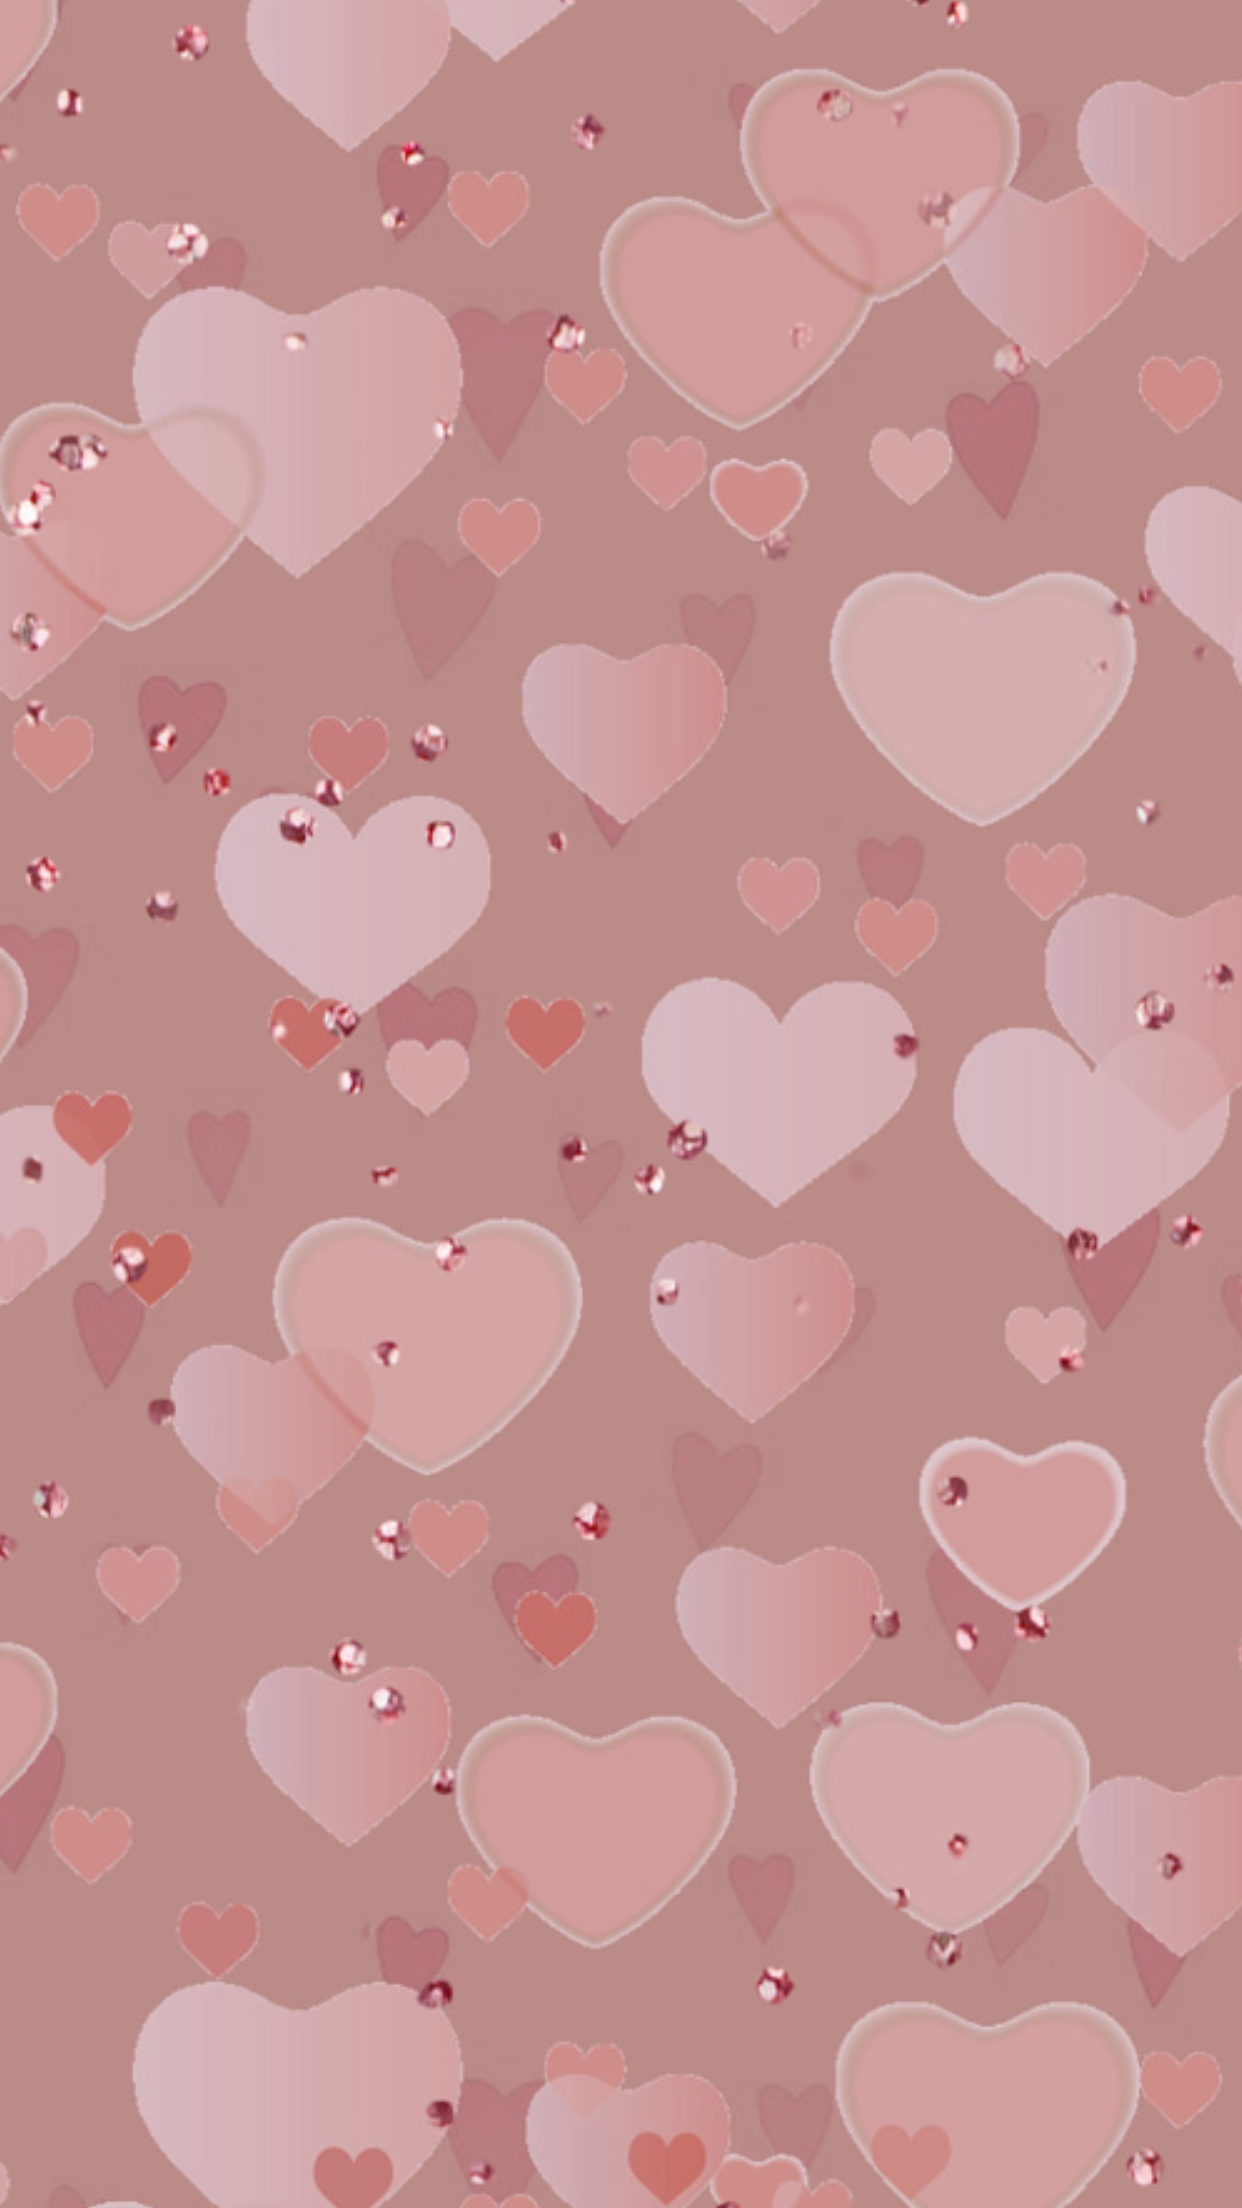 rose with heart wallpaper,heart,pink,pattern,design,valentine's day